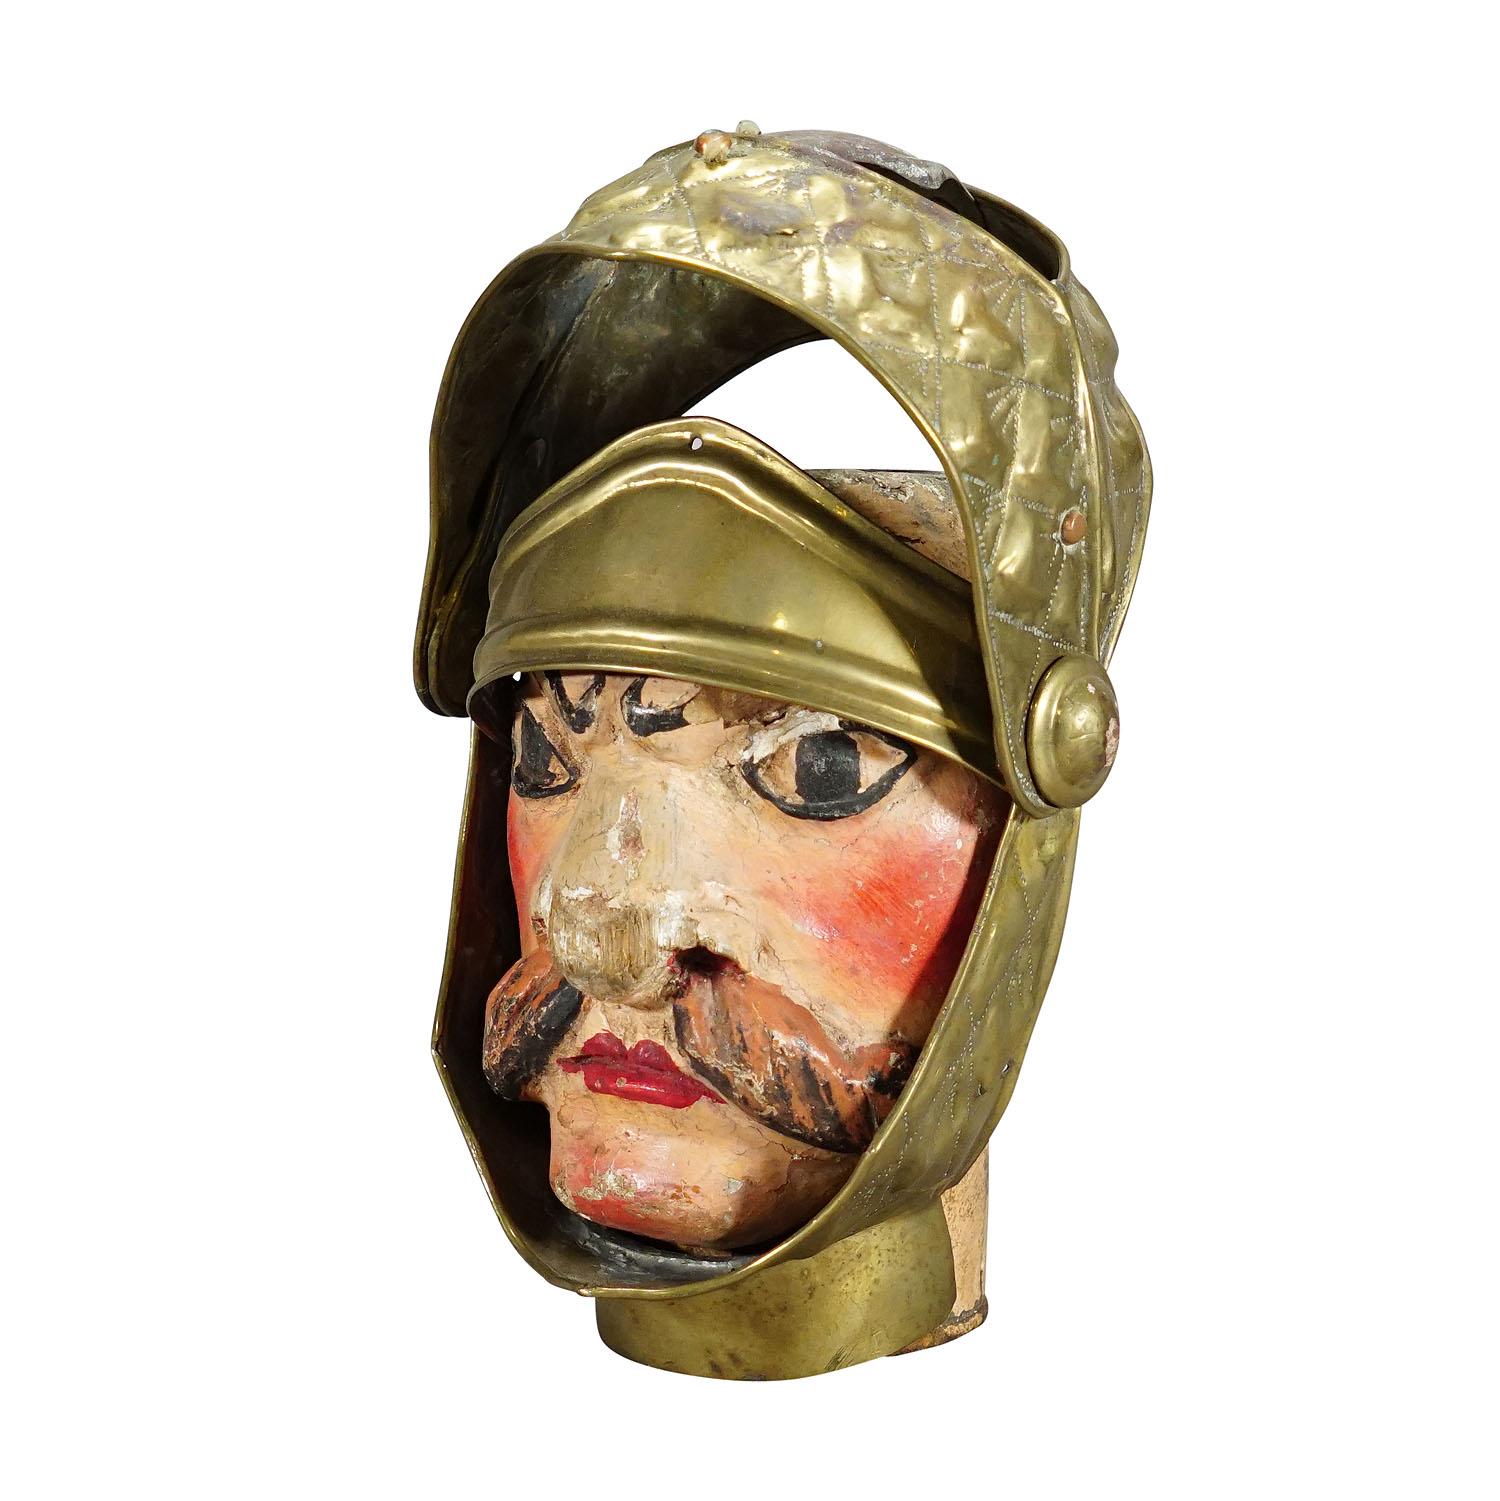 Antique Head of a Sicilian puppet, ca. 1900s

Antique Head of a Sicilian puppet depicting a knight. Made of handcarved and handpainted wood with handforged metal helmet. Manufactured in Sicilli late 19th century.

Measures:
Width: 6.69